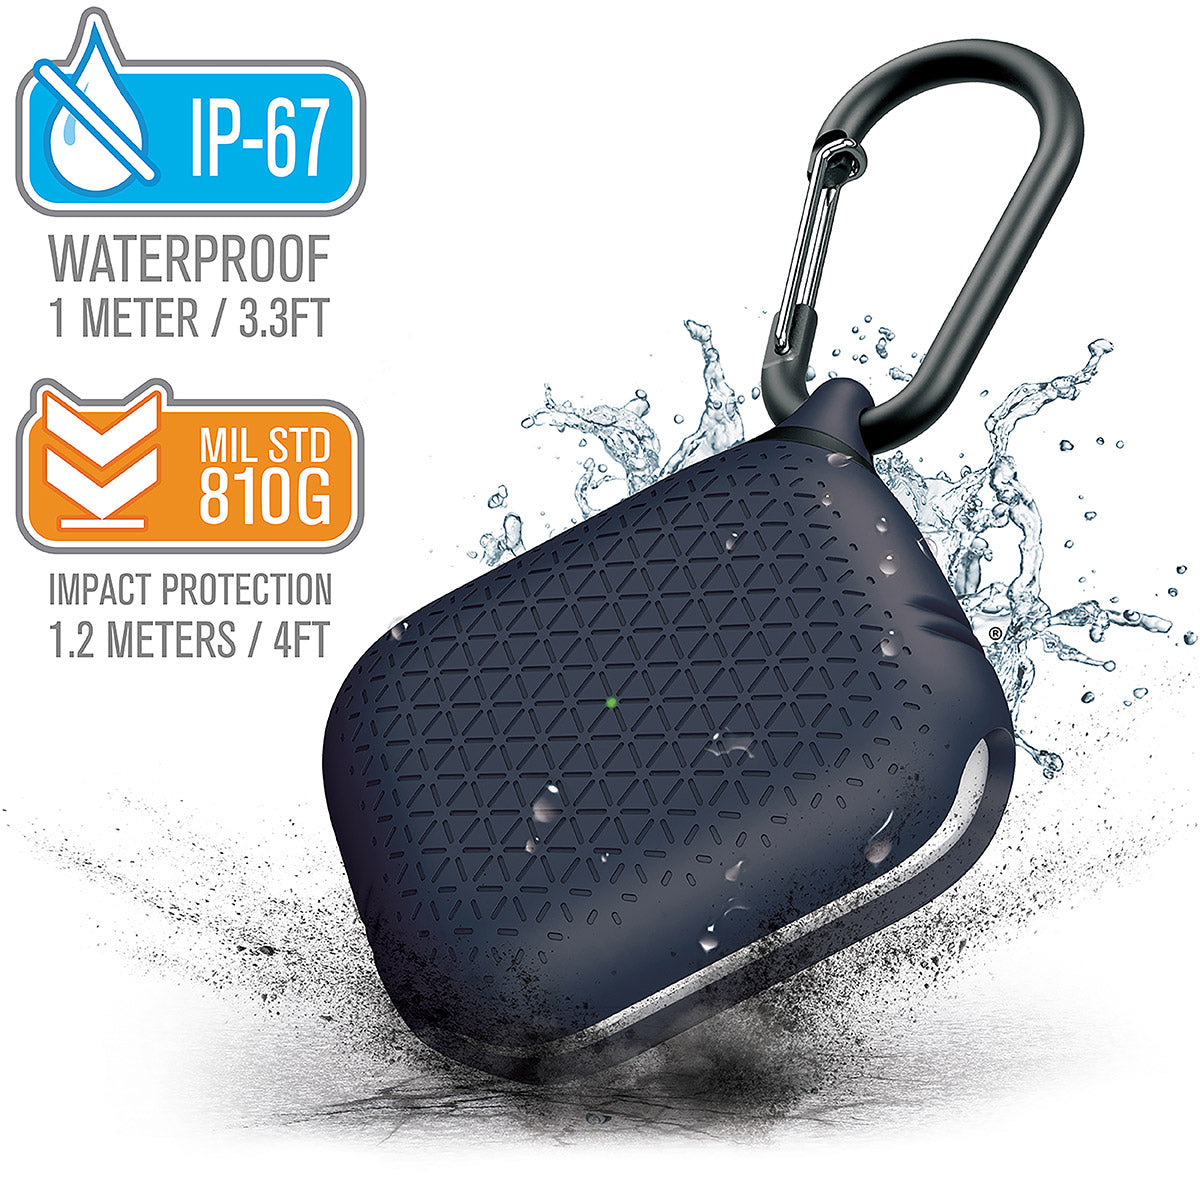 catalyst airpods pro gen 2 1 waterproof case carabiner premium edition midnight blue with cracked floor and splashes of water text reads ip-67 waterproof 1 meter 3.3ft mil std 810g impact protection 1.2 meters 4ft